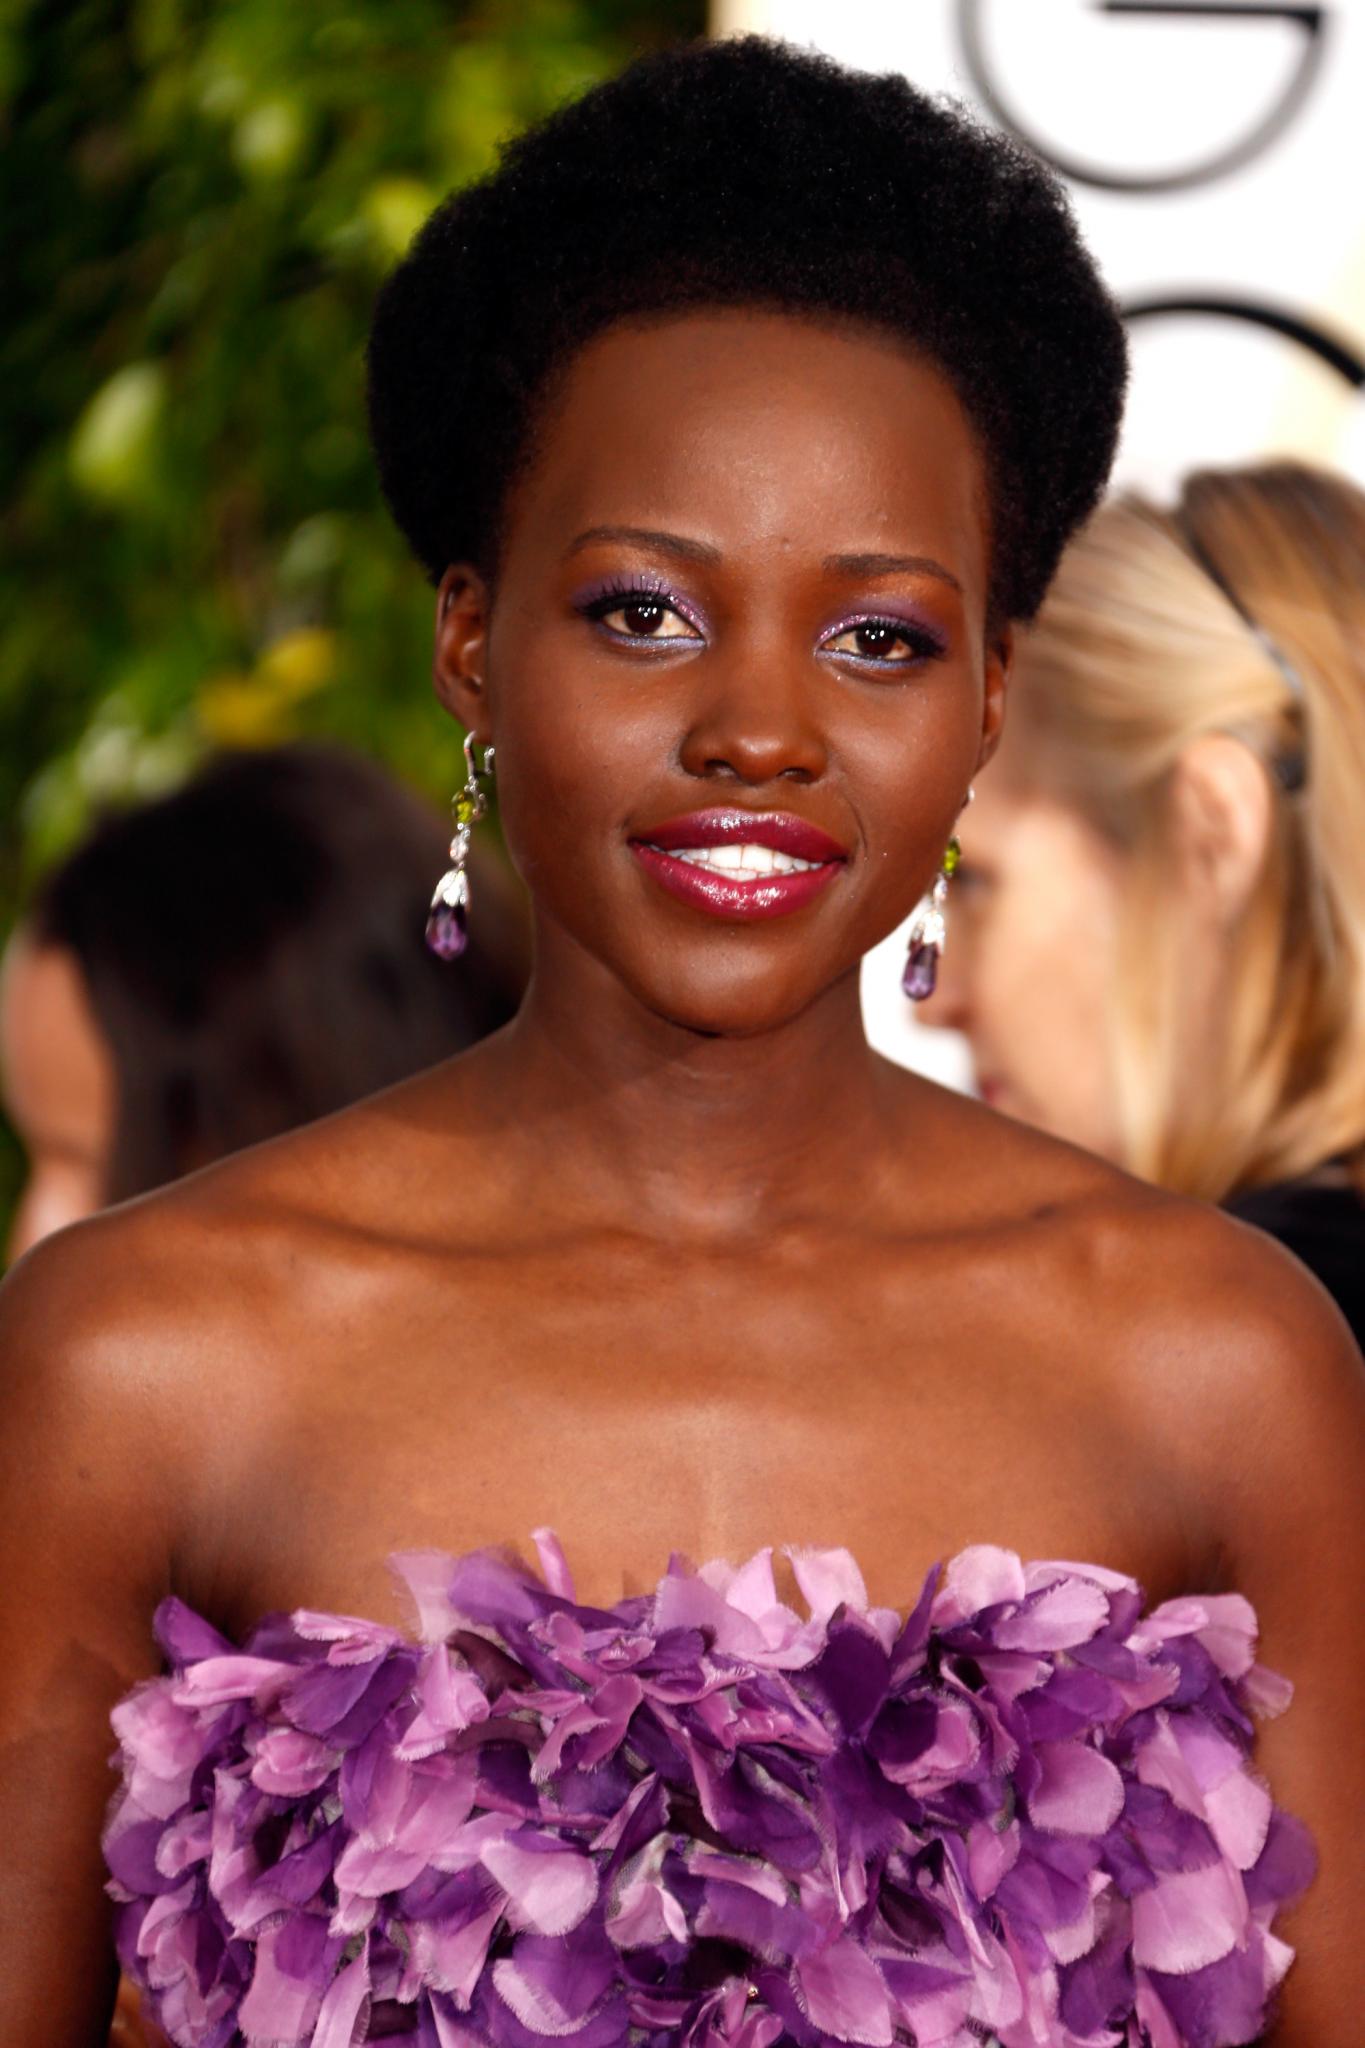 Lupita Nyong'o Might Play the Love Interest in 'Black Panther'
